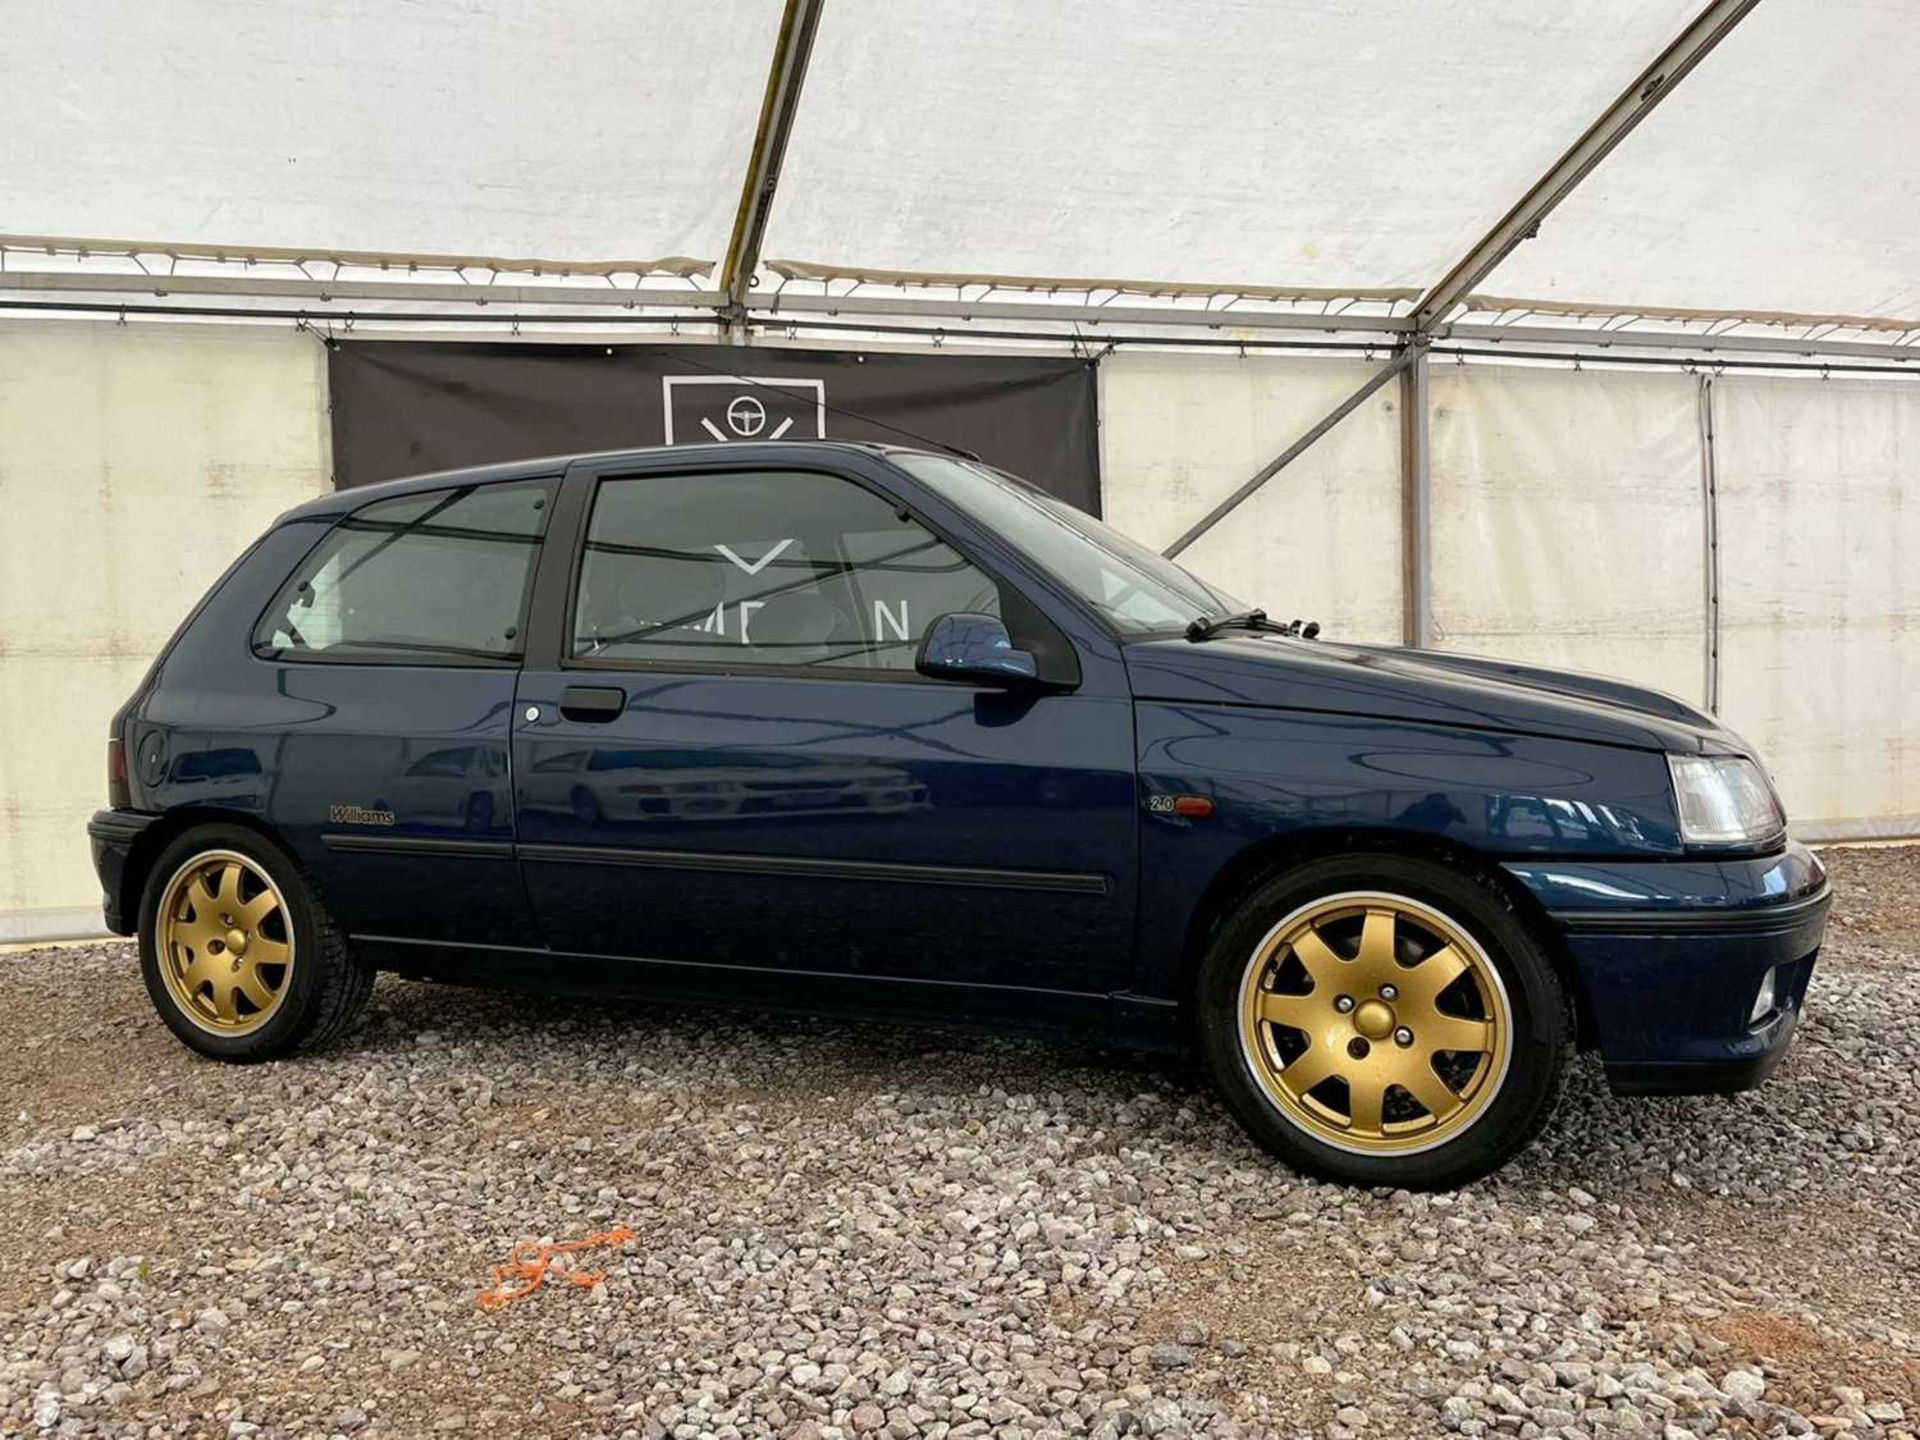 1994 Renault Clio Williams UK-delivered, first series model and said to be one of just 390 produced - Image 3 of 44